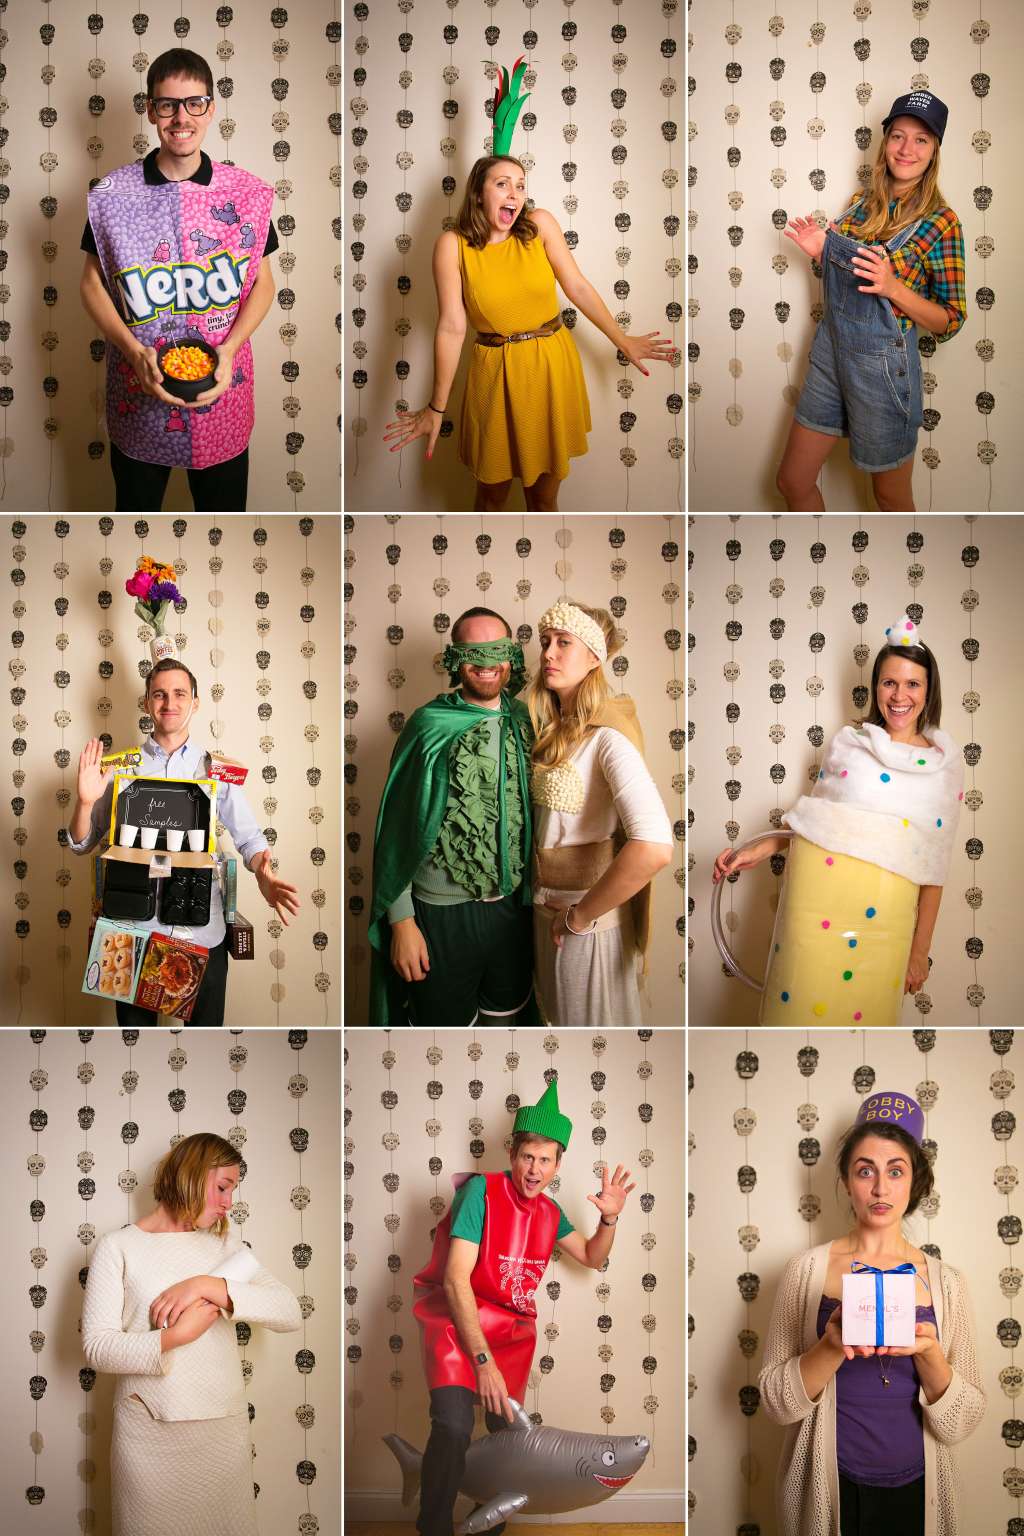 A Spooky Colorful Halloween Party | Kitchn